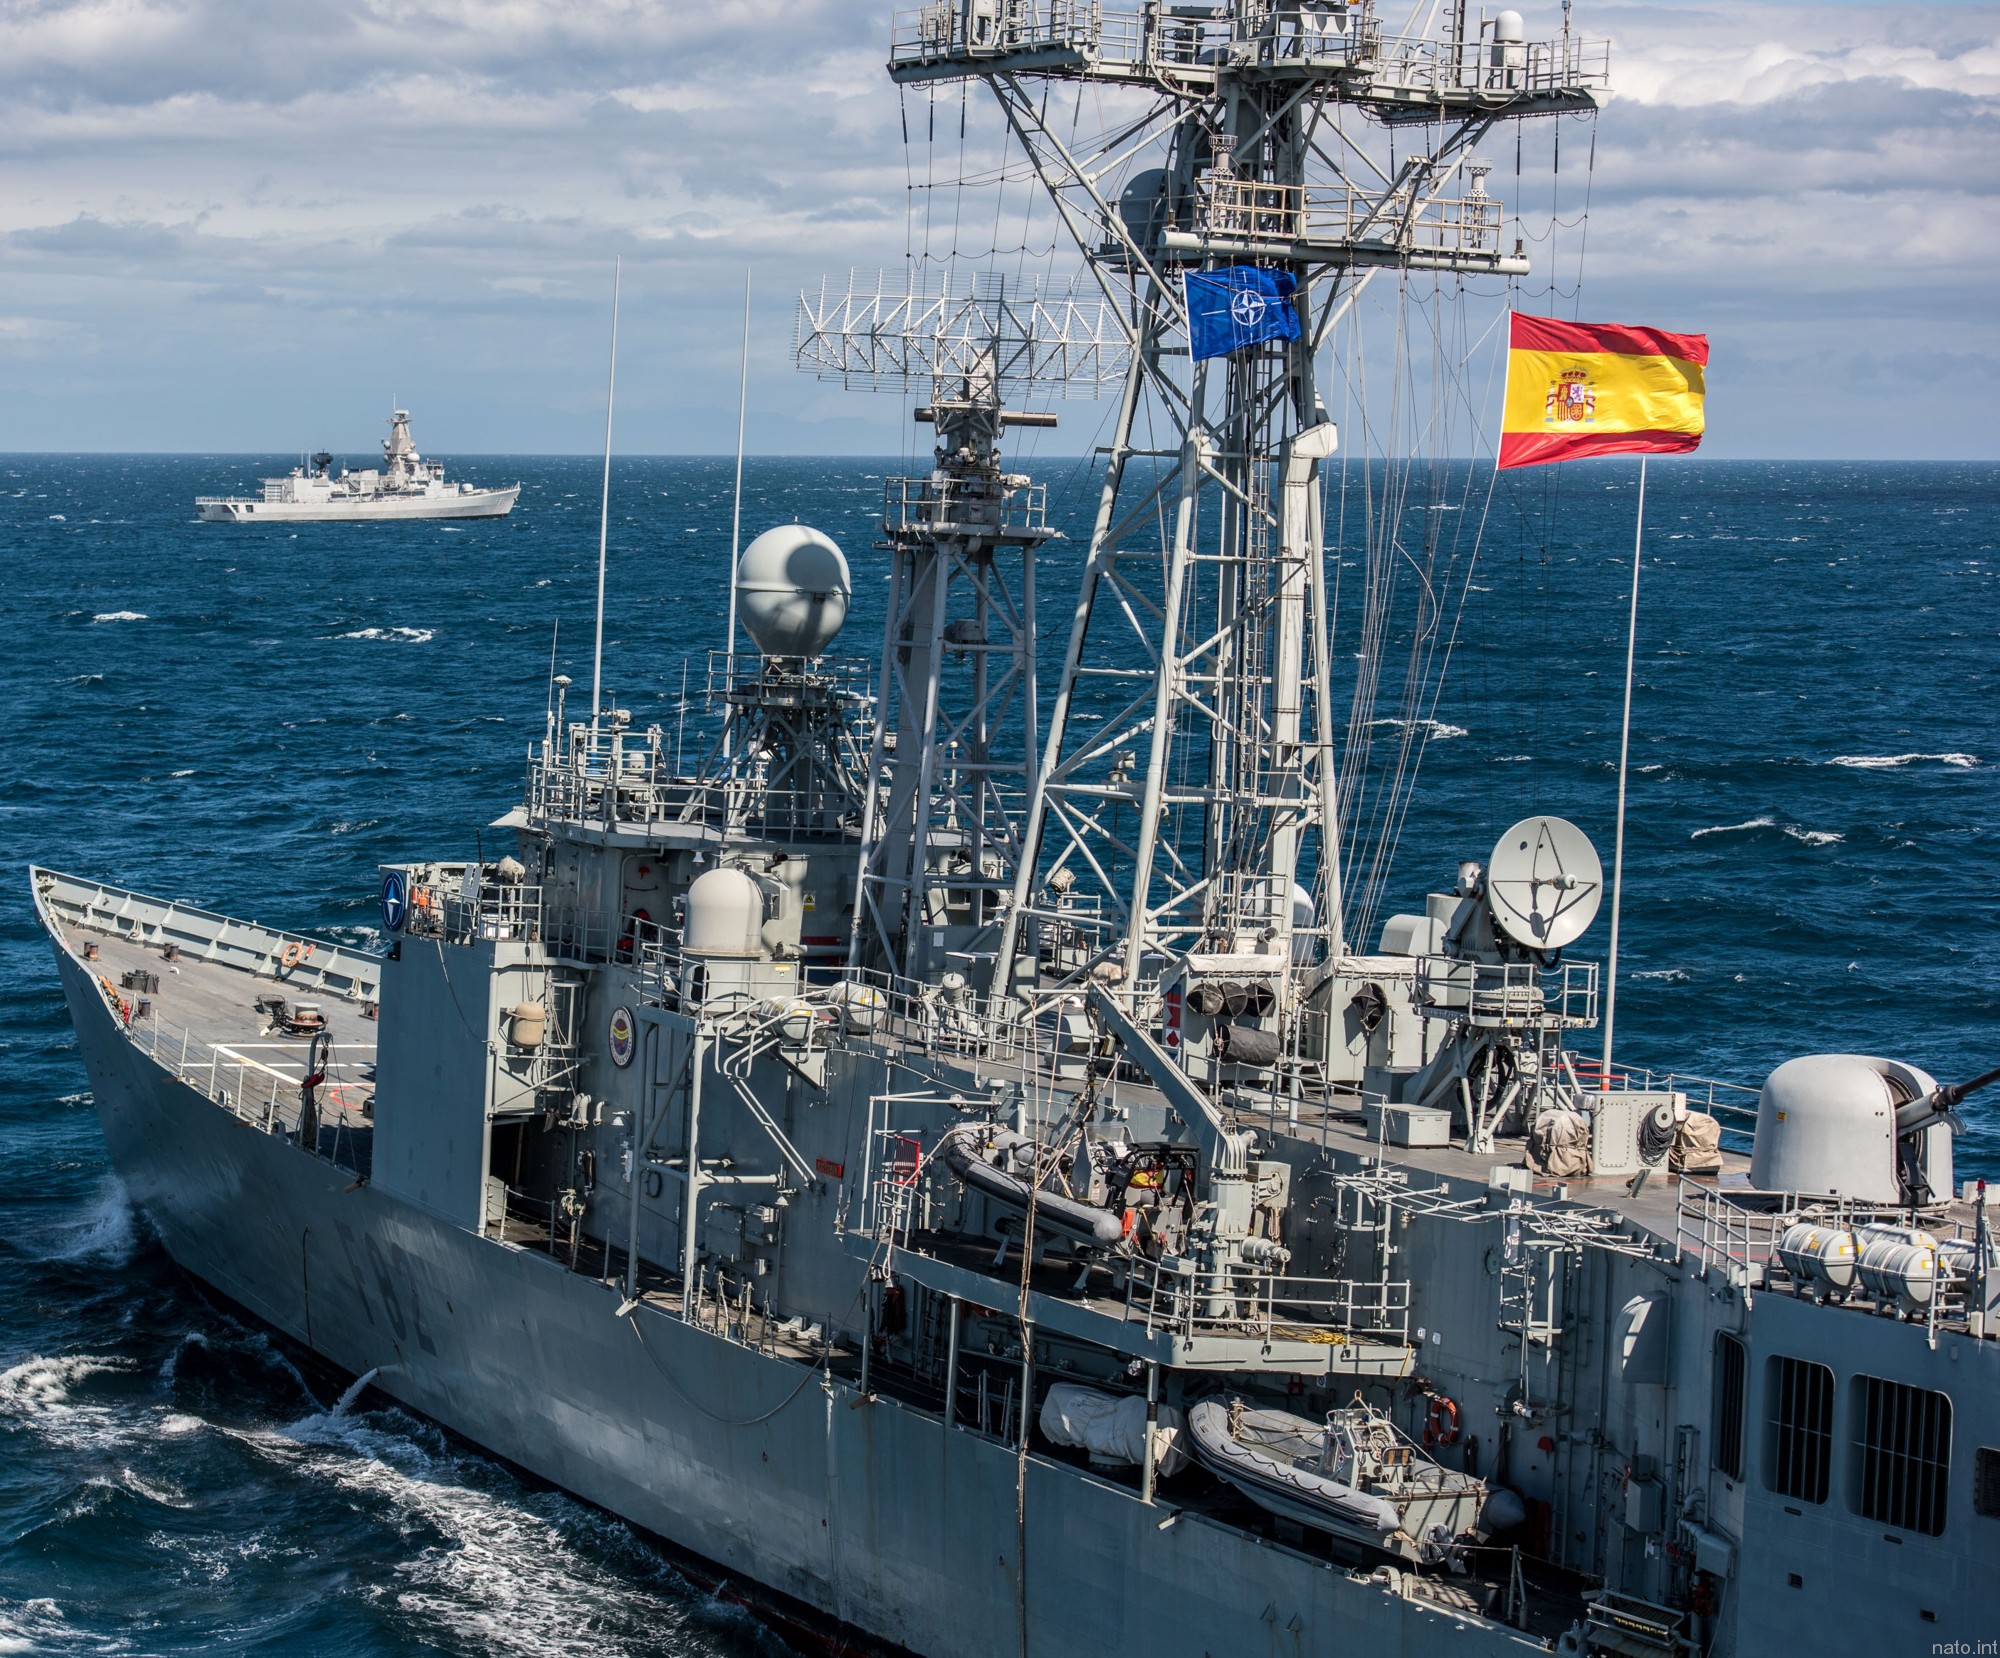 f-82 sps victoria f80 santa maria class guided missile frigate spanish navy 05